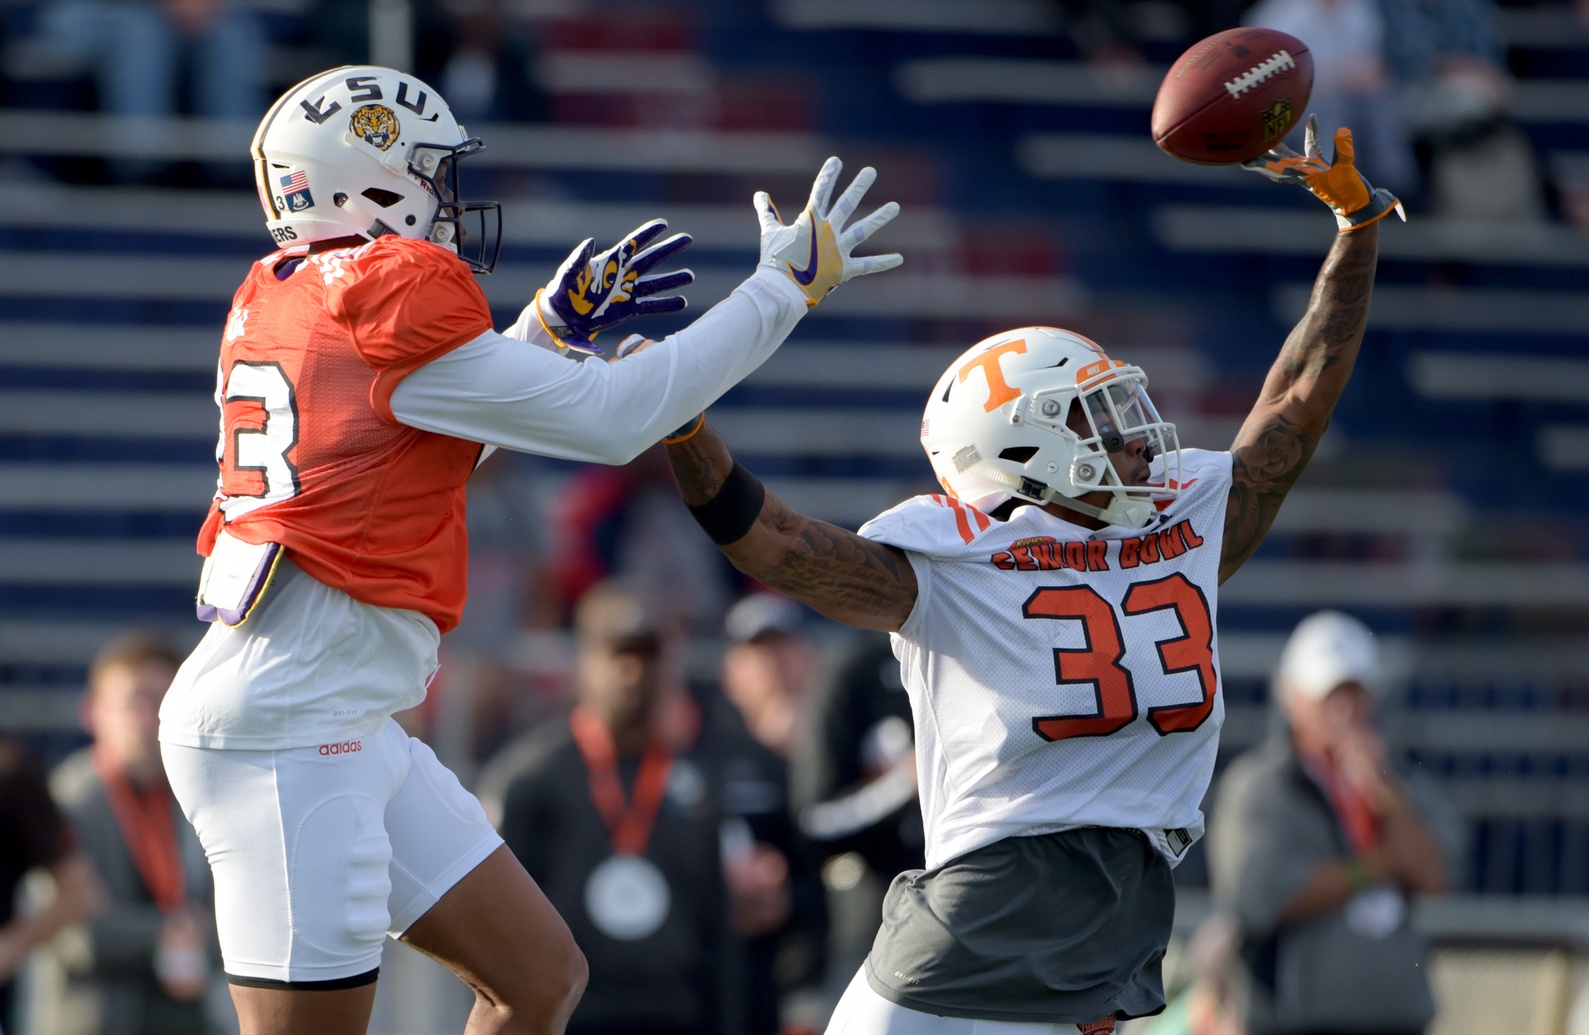 Jan 25, 2017; Mobile, AL, USA; South squad cornerback Cameron Sutton of Tennessee (33) breaks up a pass intended for wide receiver Travin Dural of LSU (83) during Senior Bowl practice at Ladd-Peebles Stadium. Mandatory Credit: Glenn Andrews-USA TODAY Sports